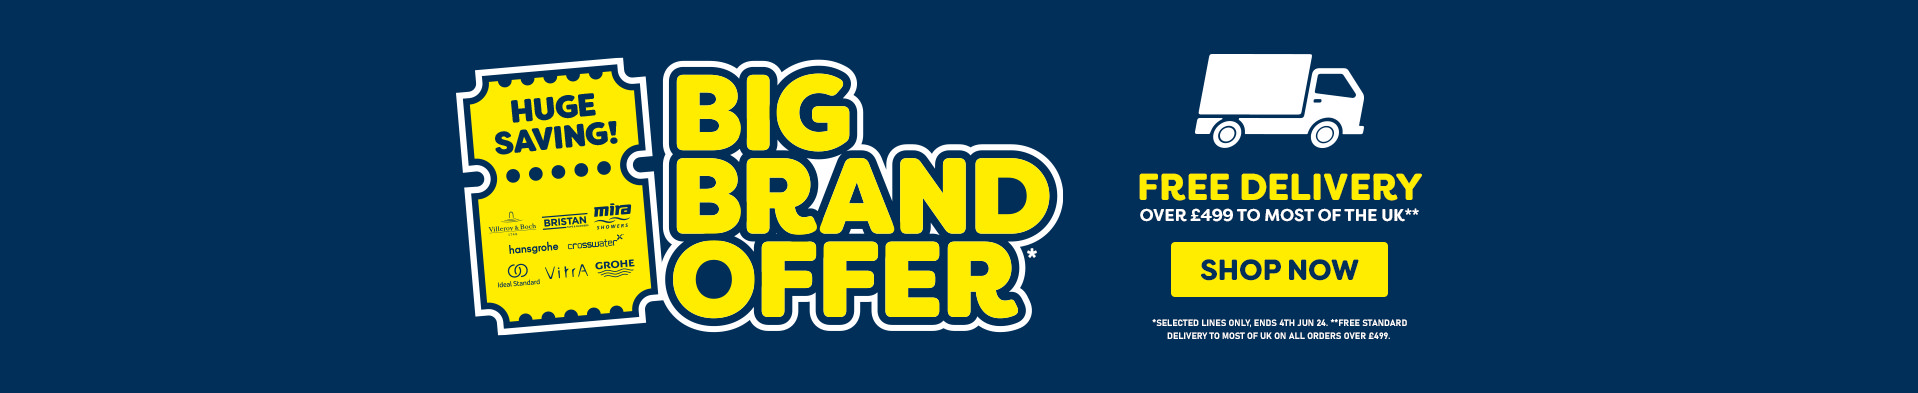 Big Brand Offer - Free Delivery